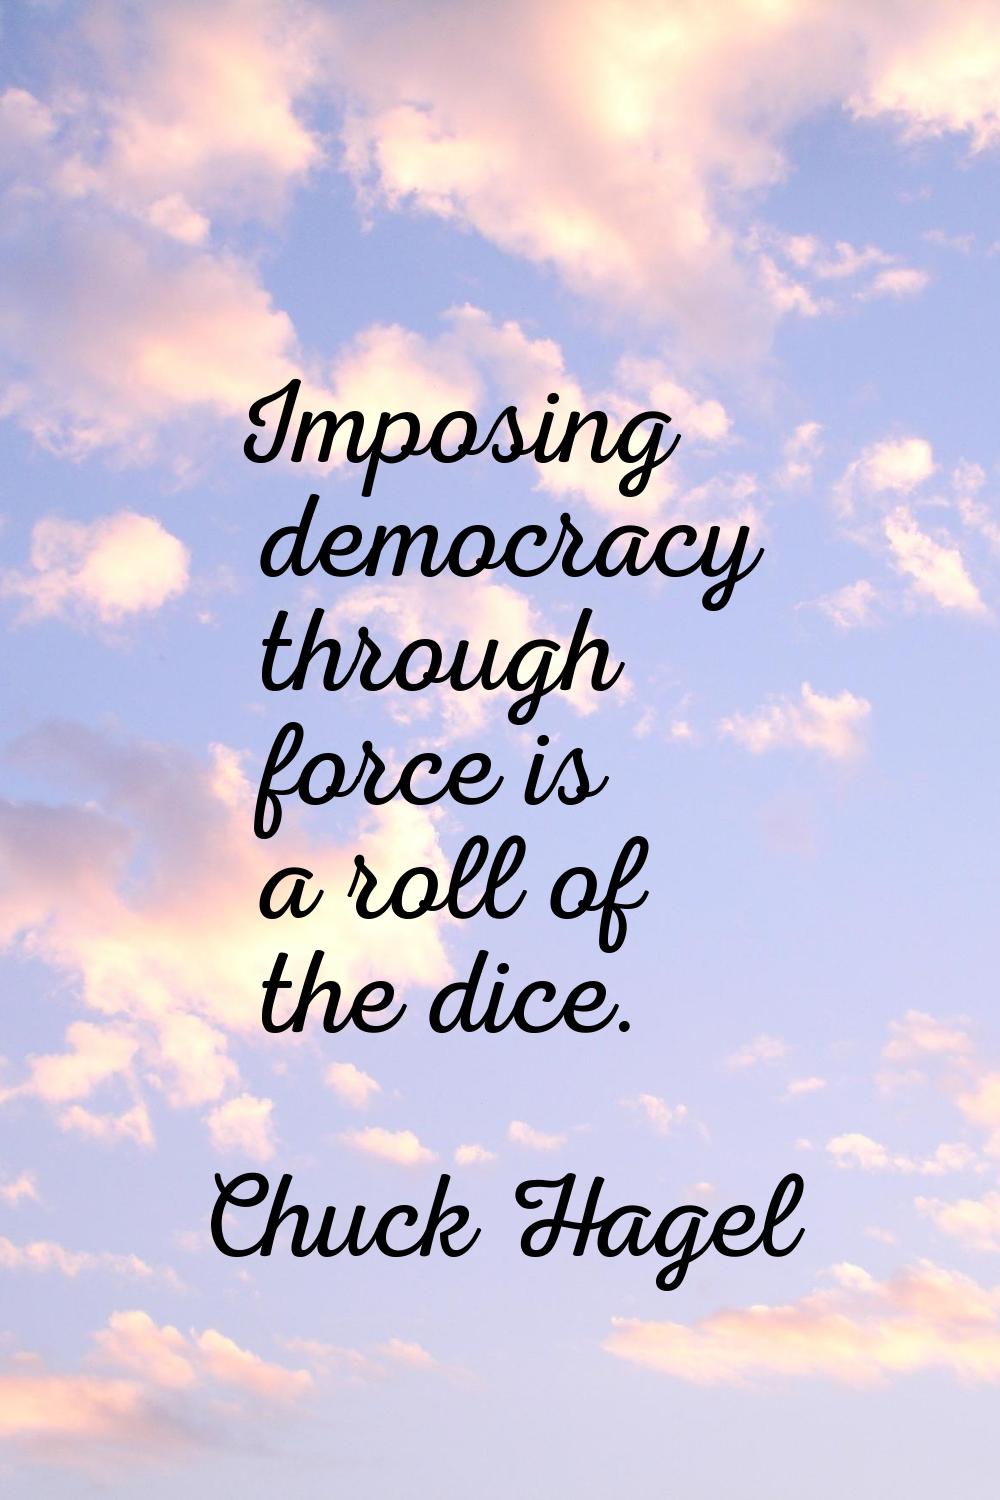 Imposing democracy through force is a roll of the dice.